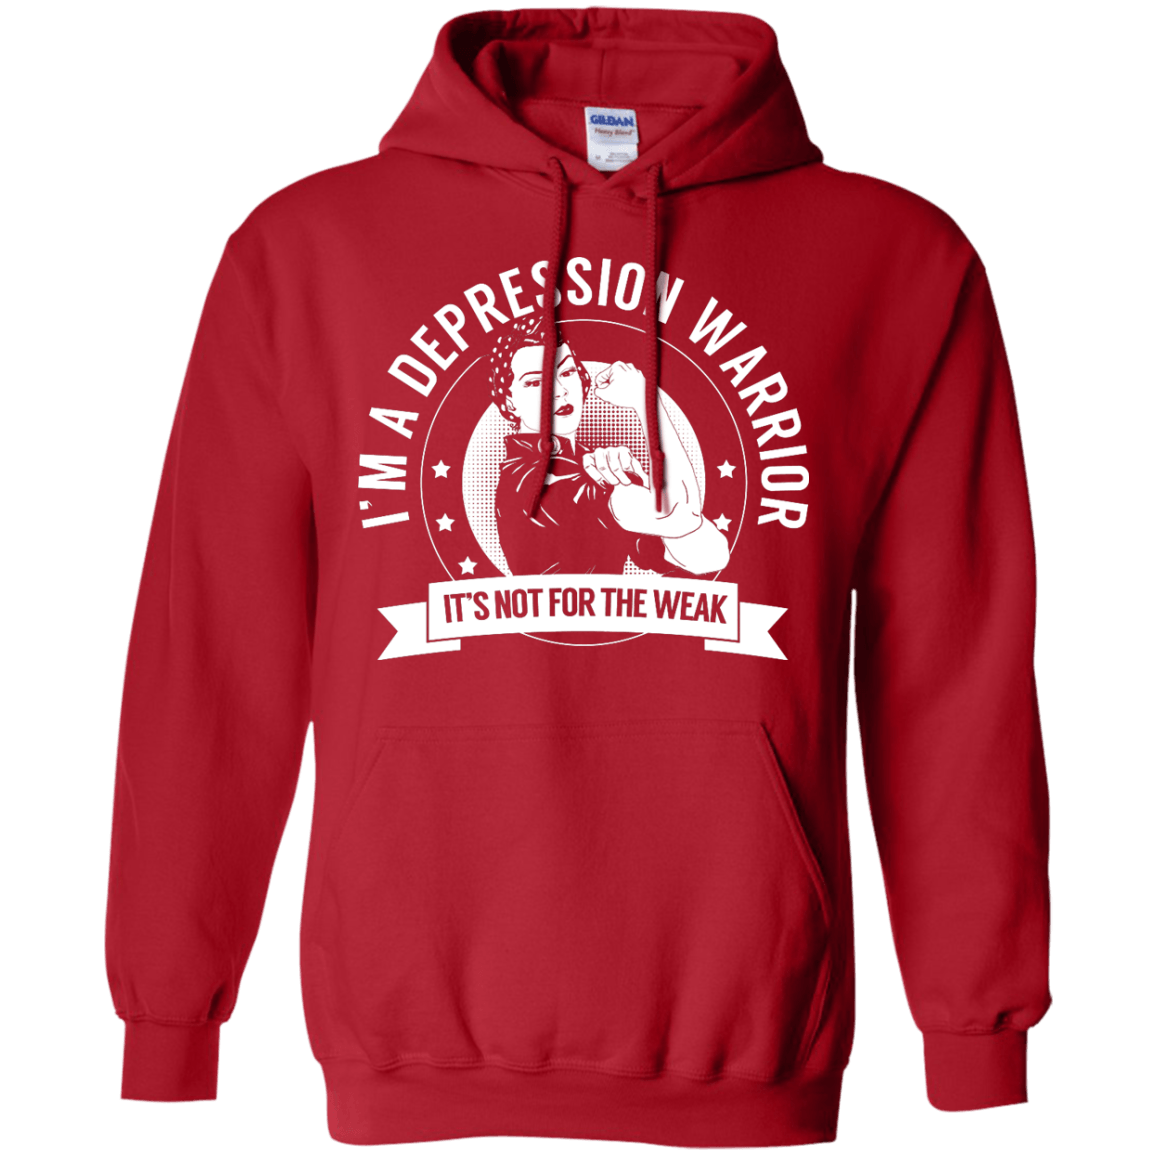 Depression Warrior Not for the Weak Pullover Hoodie 8 oz - The Unchargeables